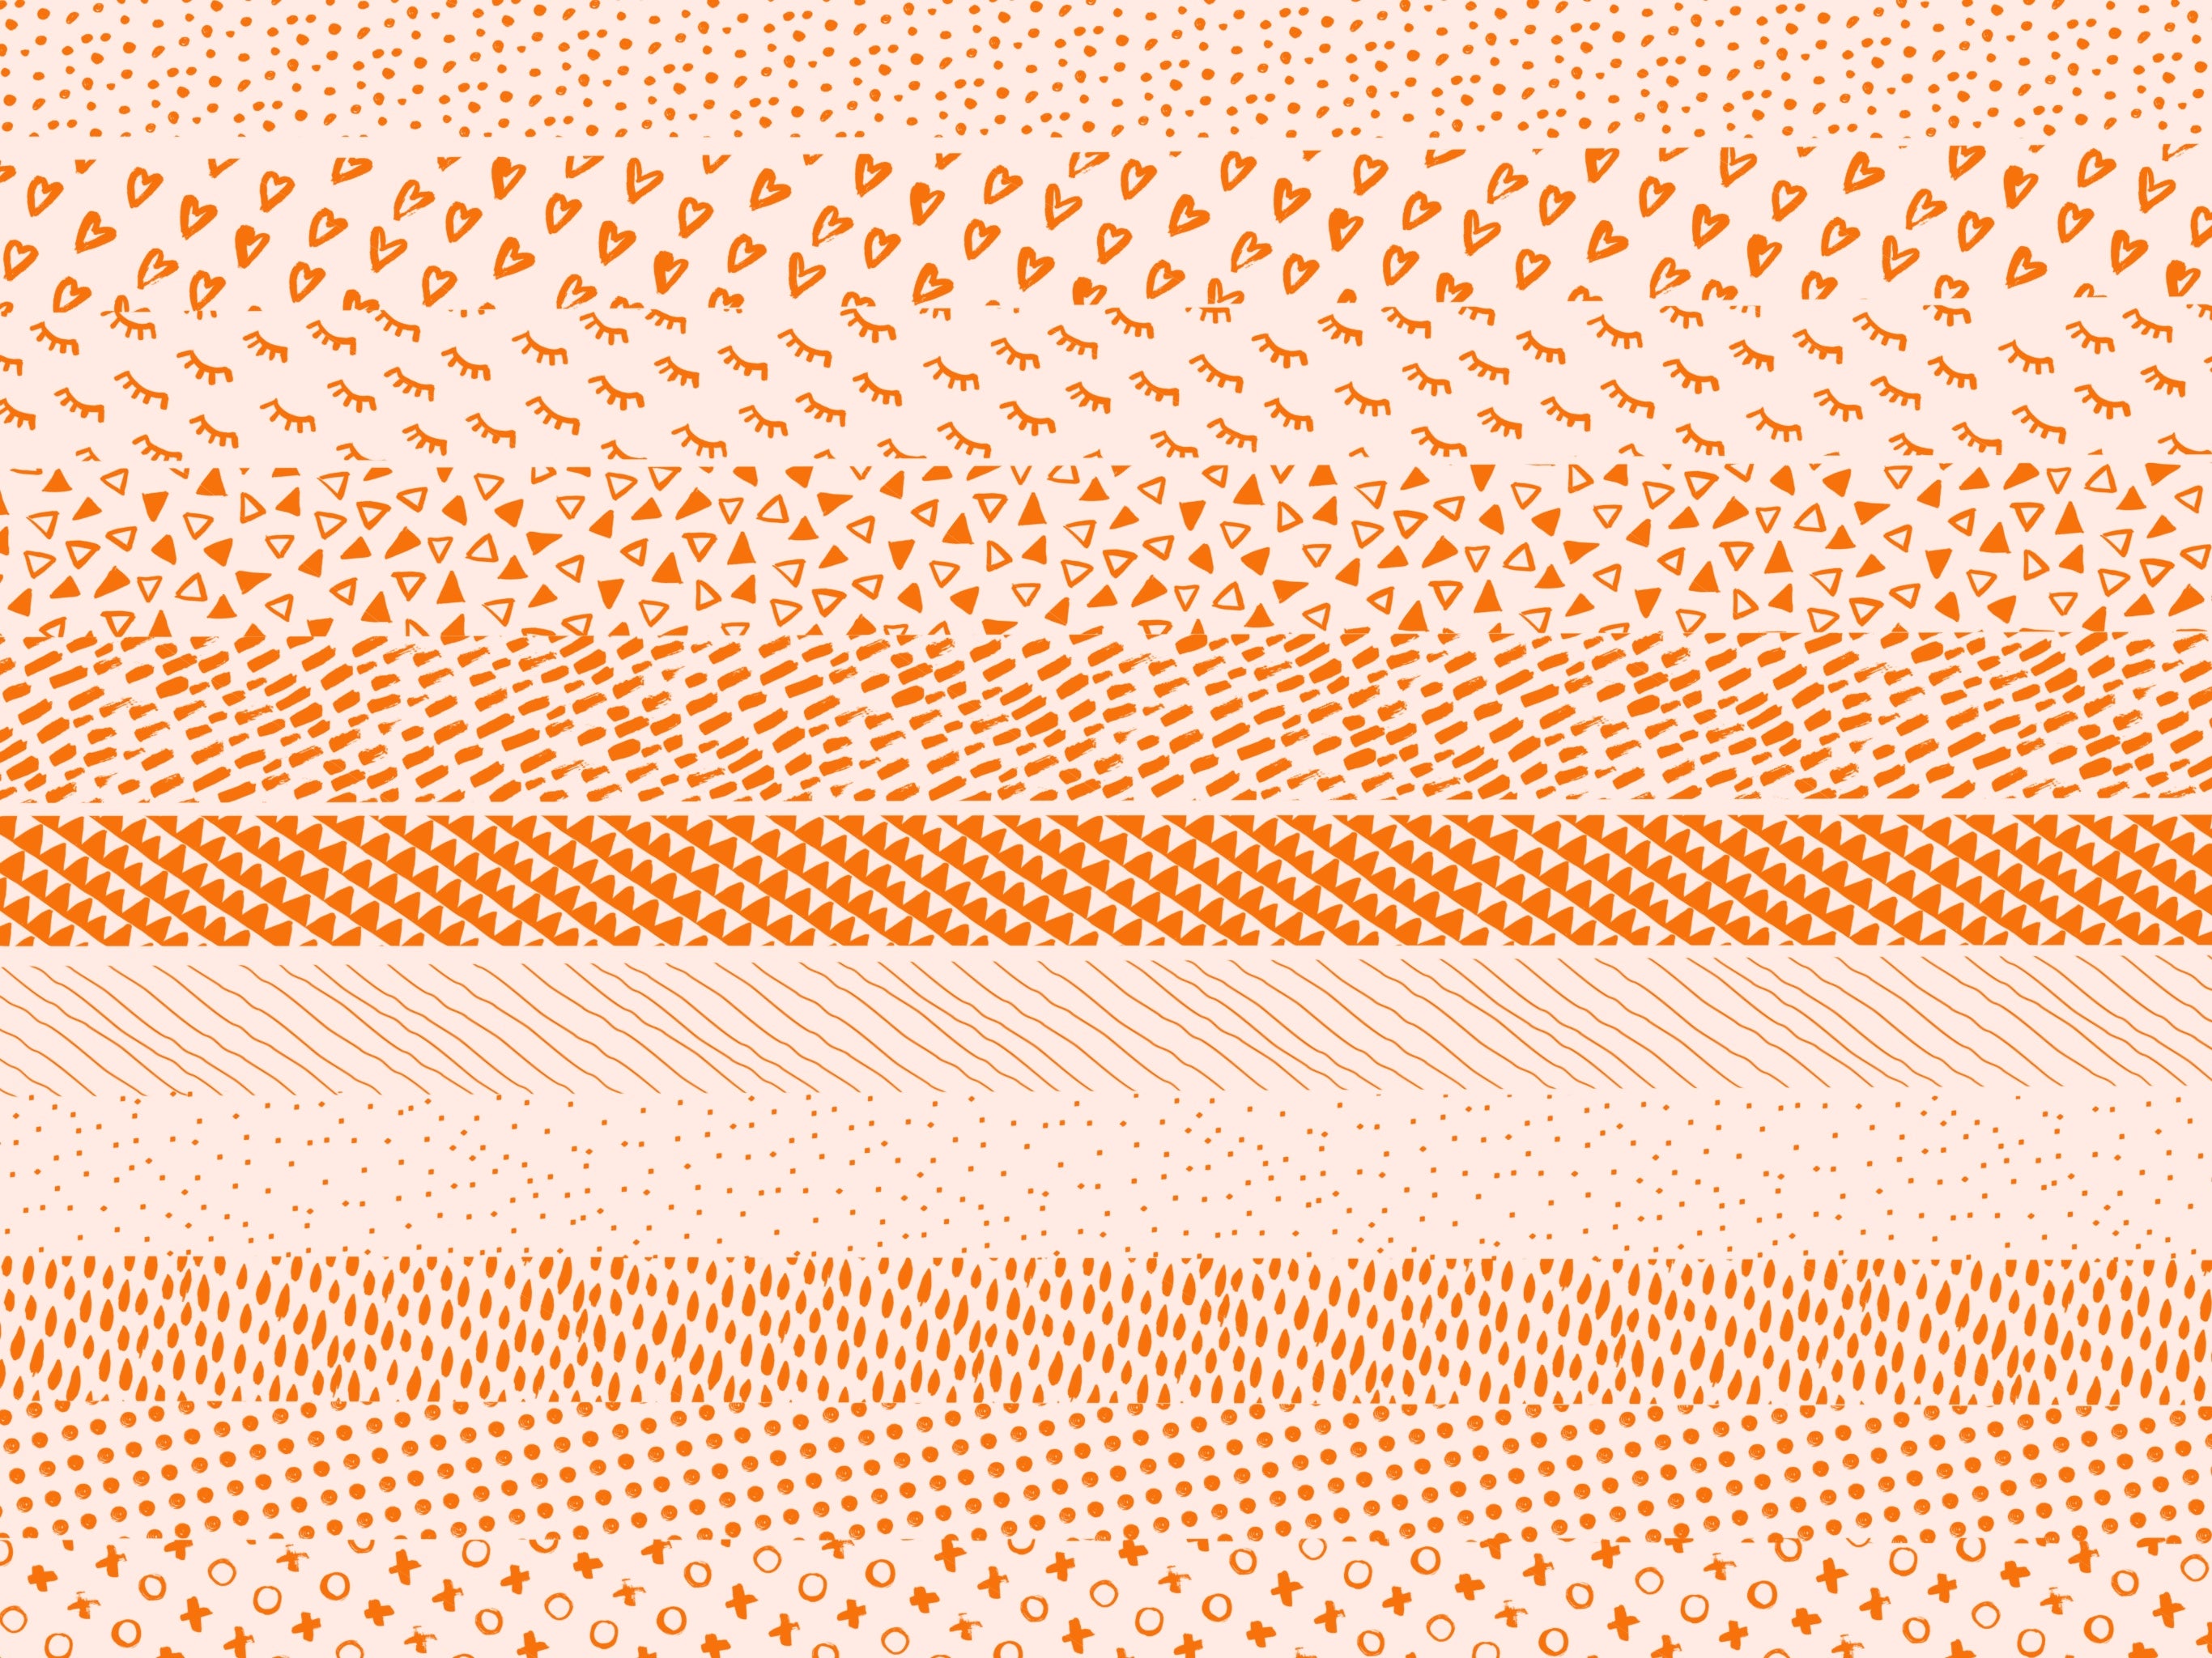 101 Seamless Pattern Brushes for Procreate